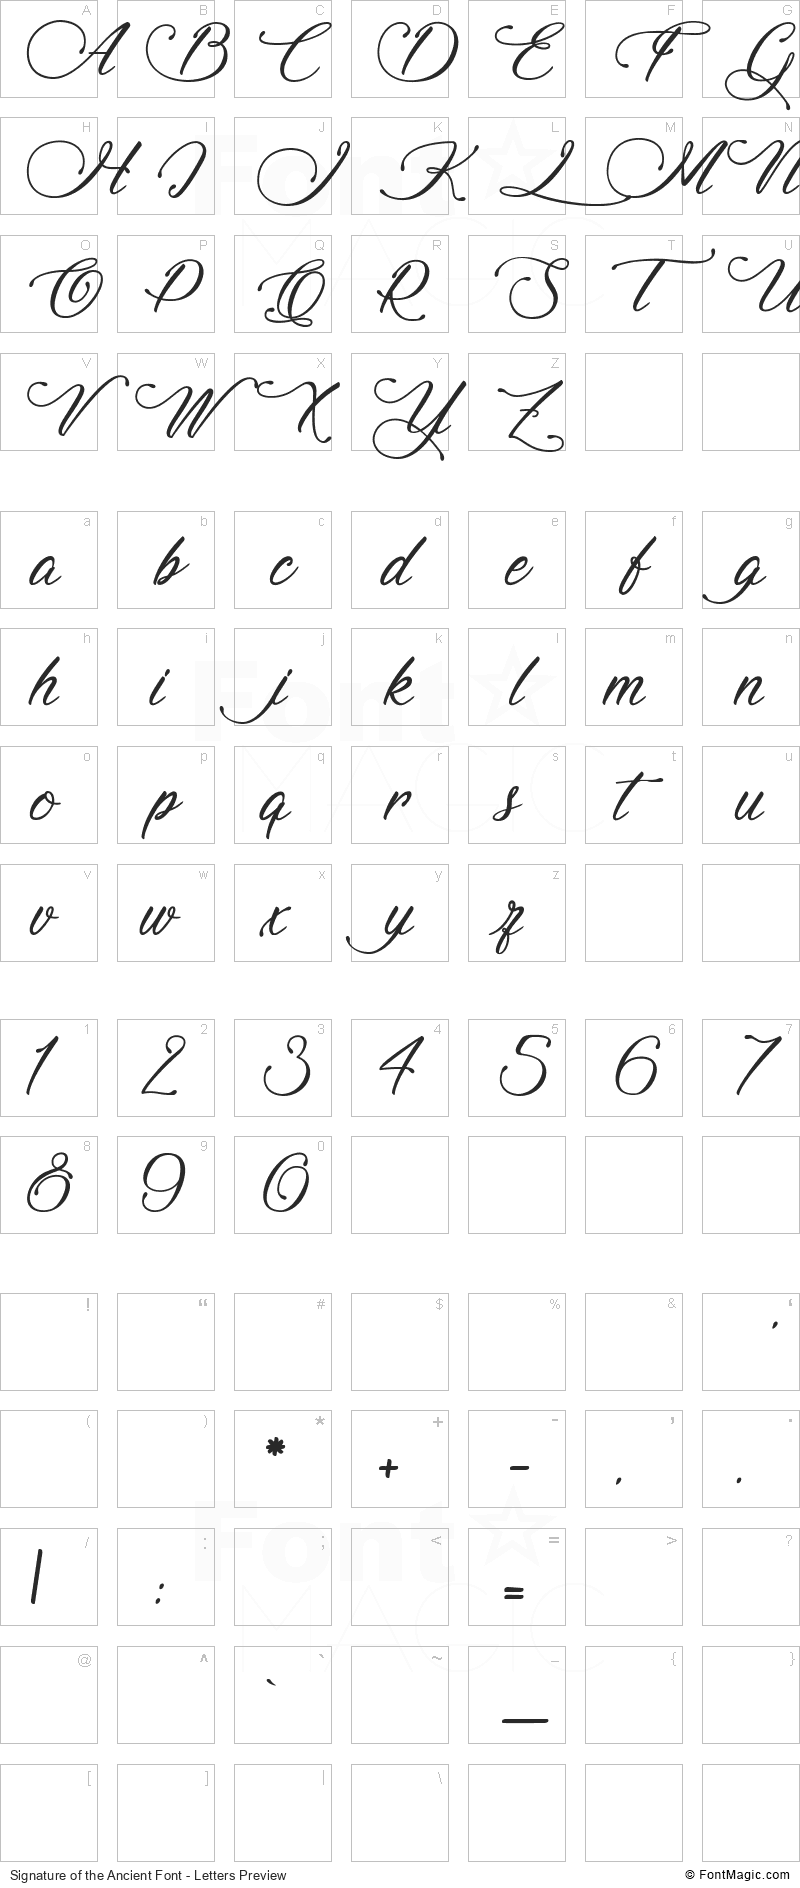 Signature of the Ancient Font - All Latters Preview Chart